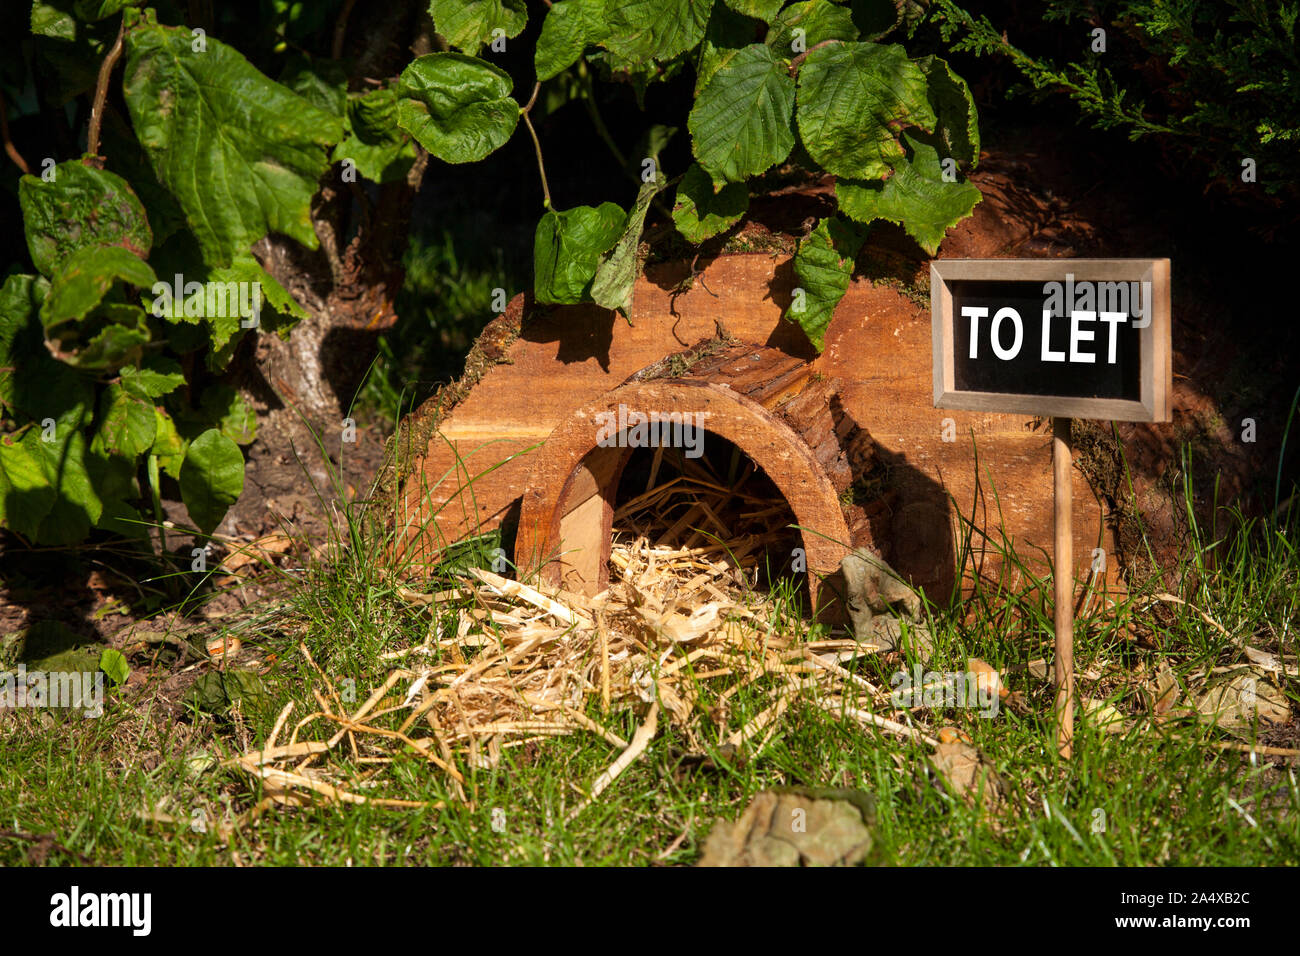 A hedgehog house in a garden in the U.K. Stock Photo